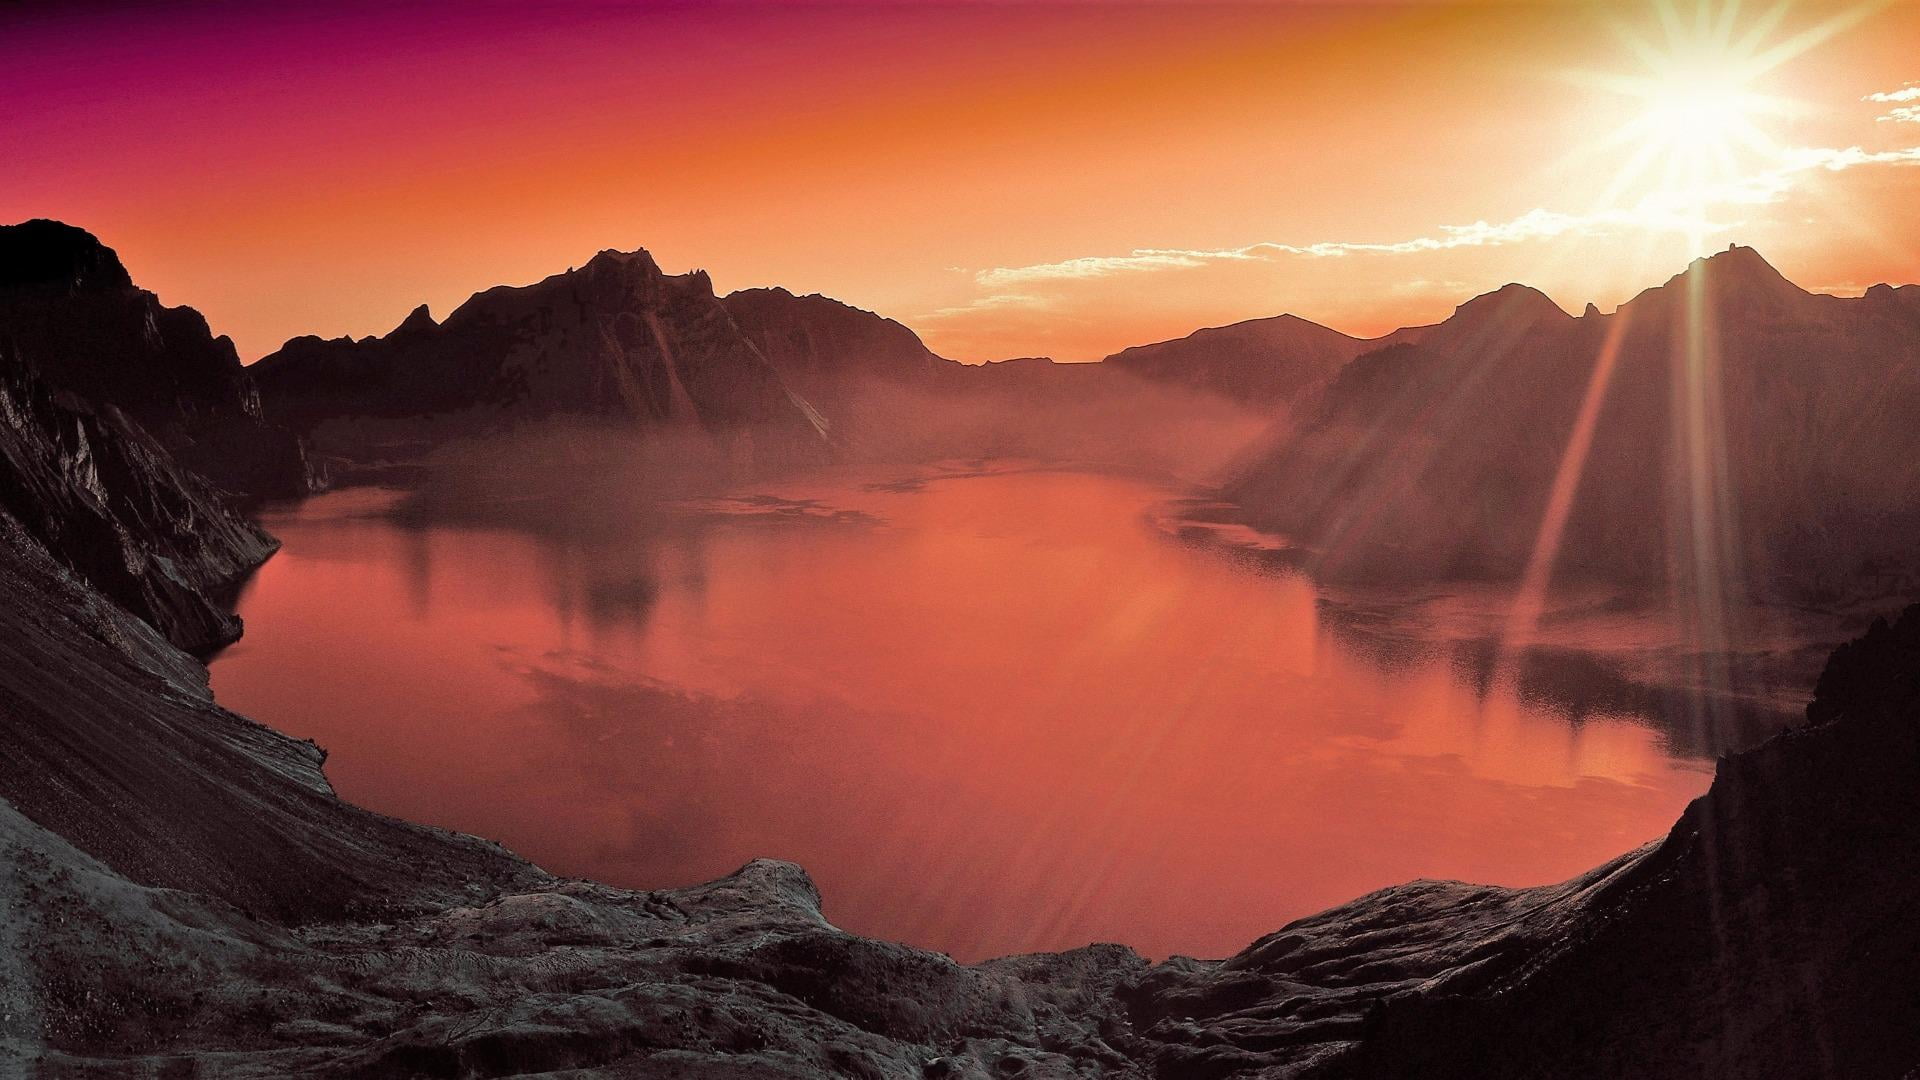 changbaishan national nature reserve, sun, red sky, reflection